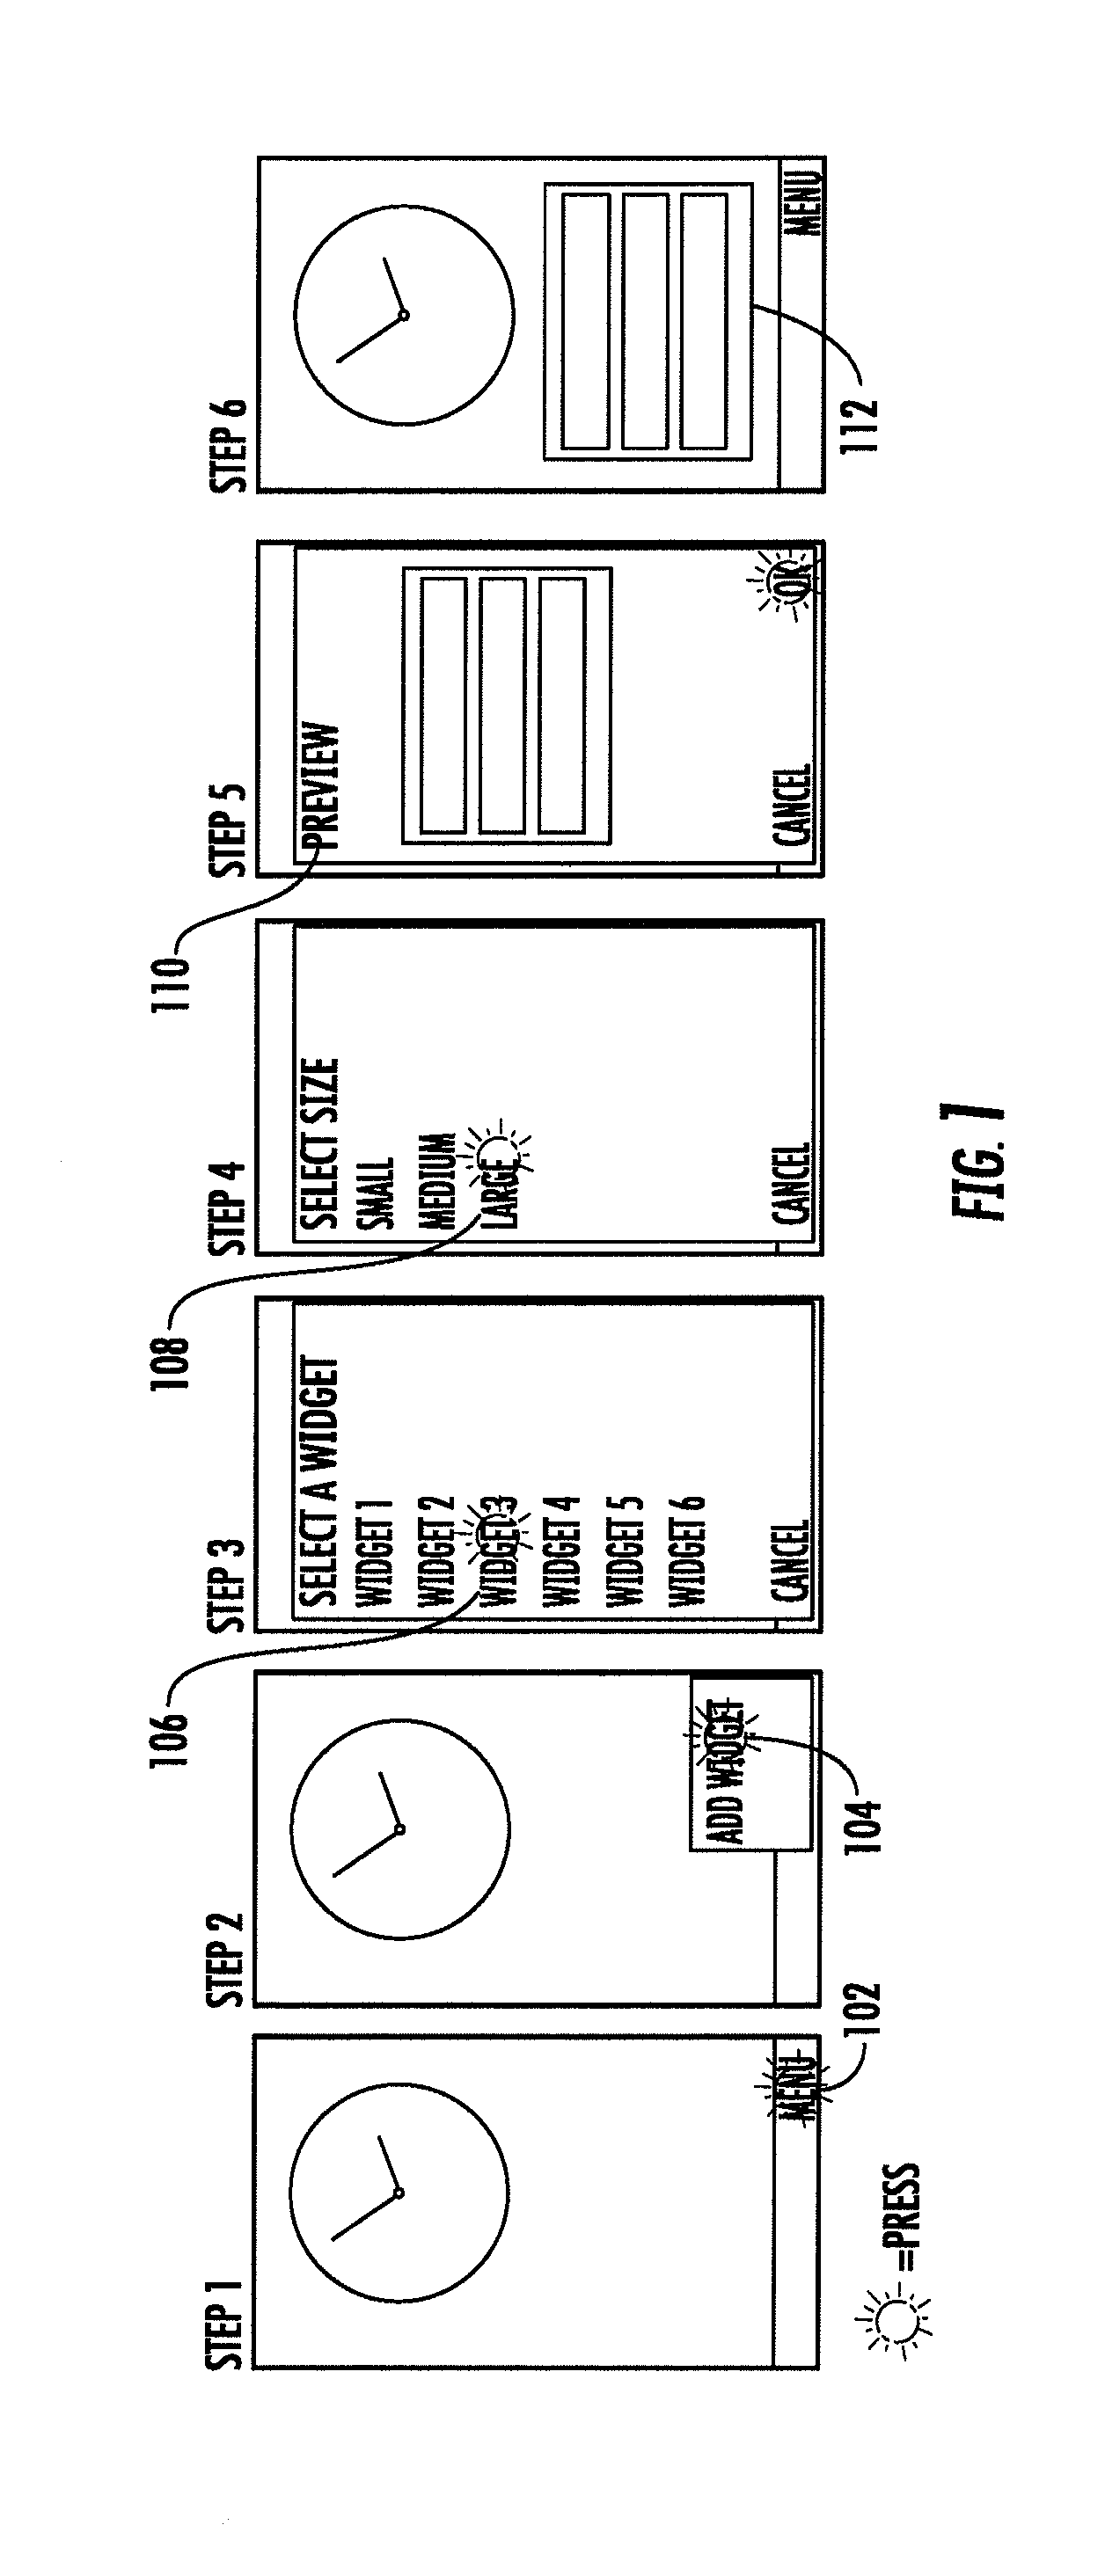 Methods and apparatuses for facilitating management of widgets